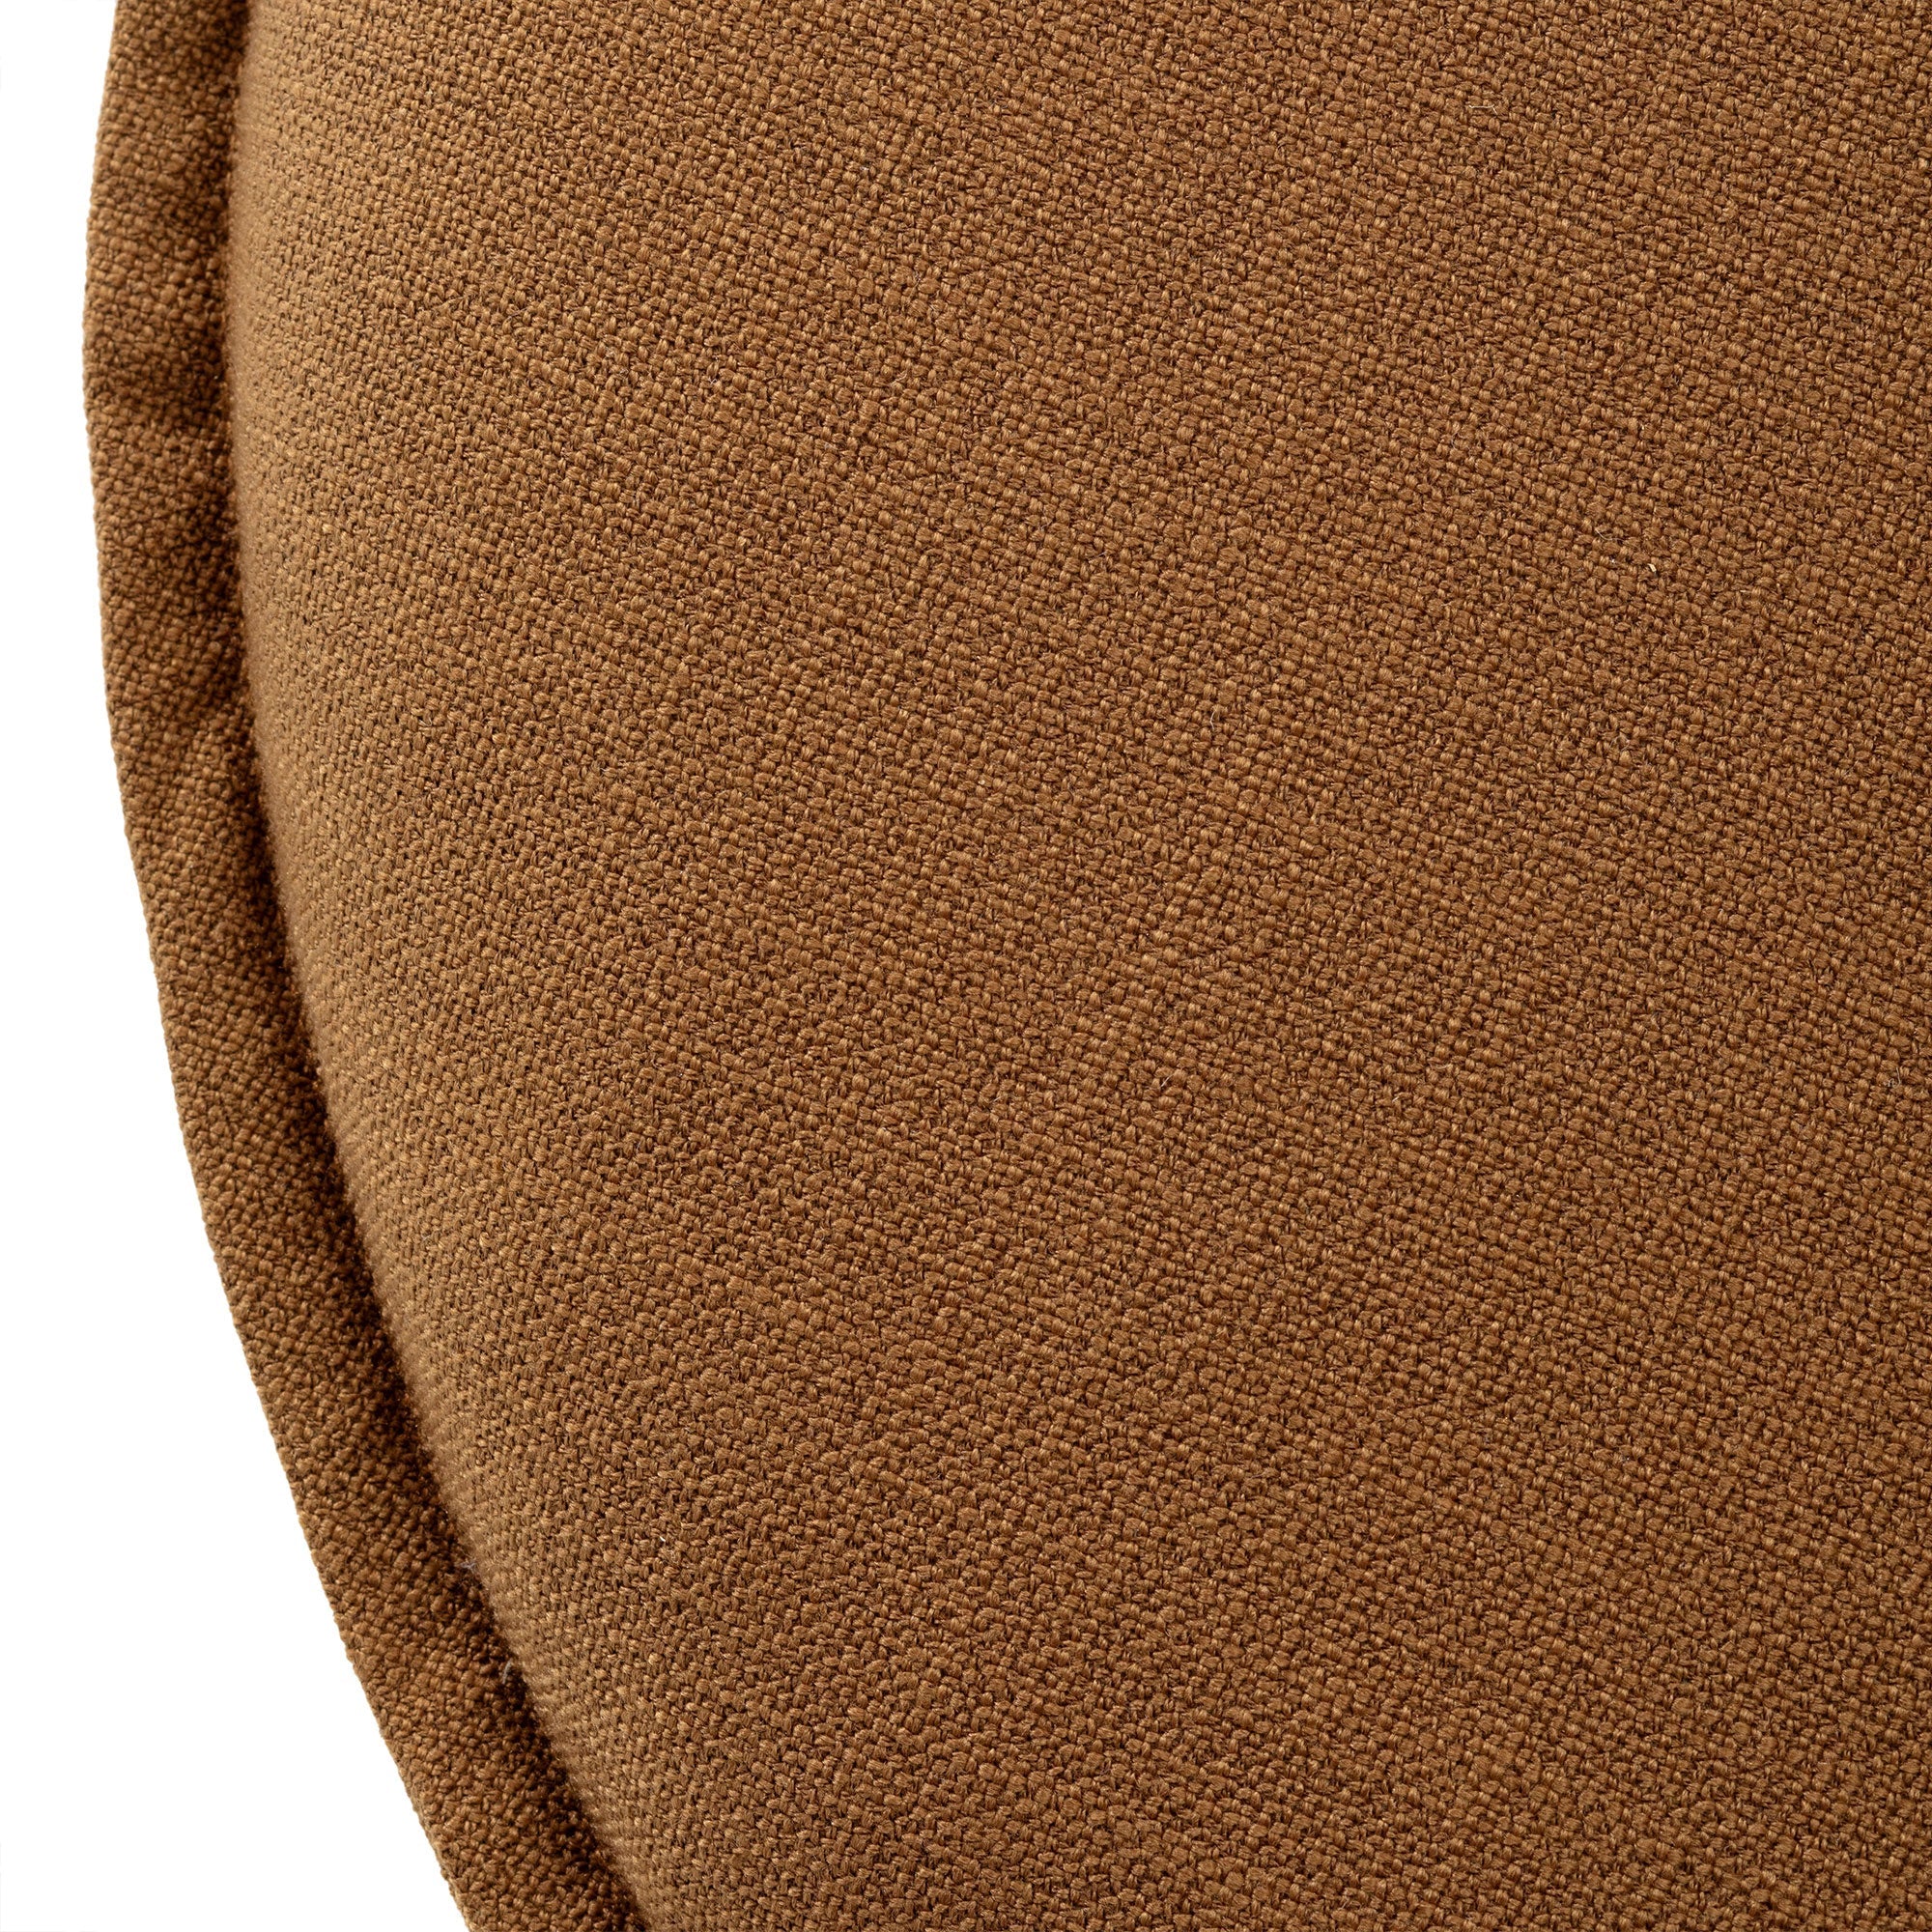 Lyra Organic Ottoman in Clay Fabric Upholstery in Ottomans & Benches by Maven Lane